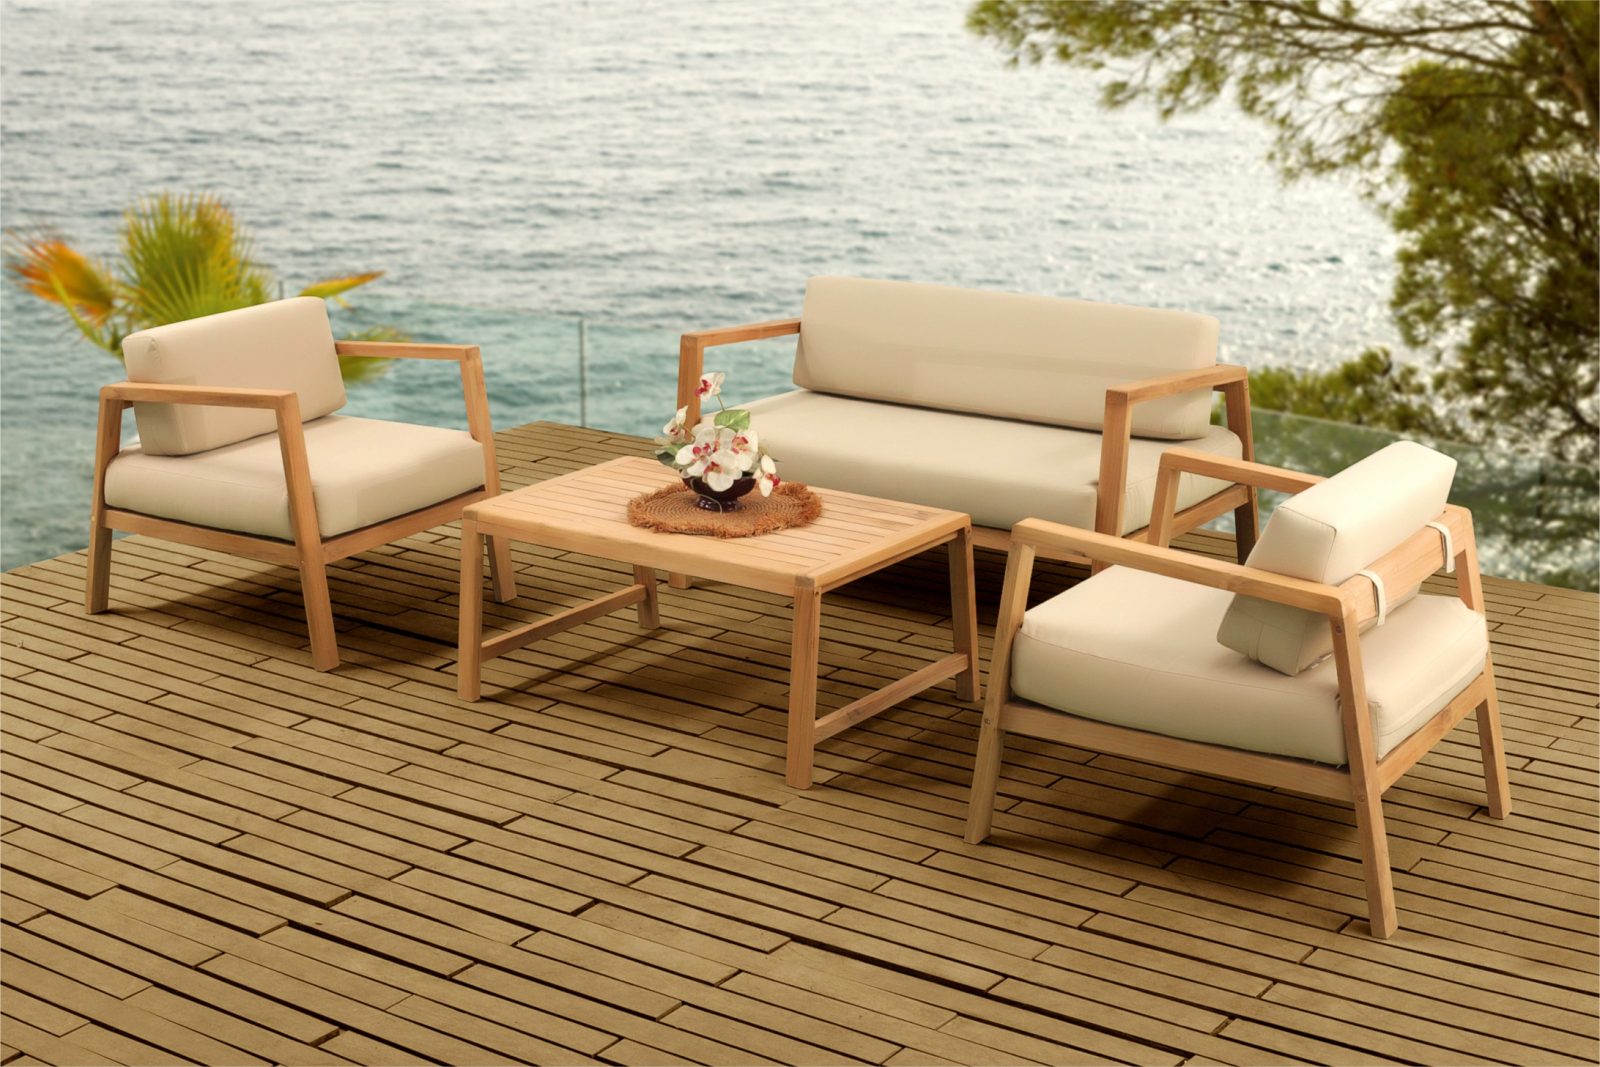 The Authentic Charm Of Indonesia Teak Furniture